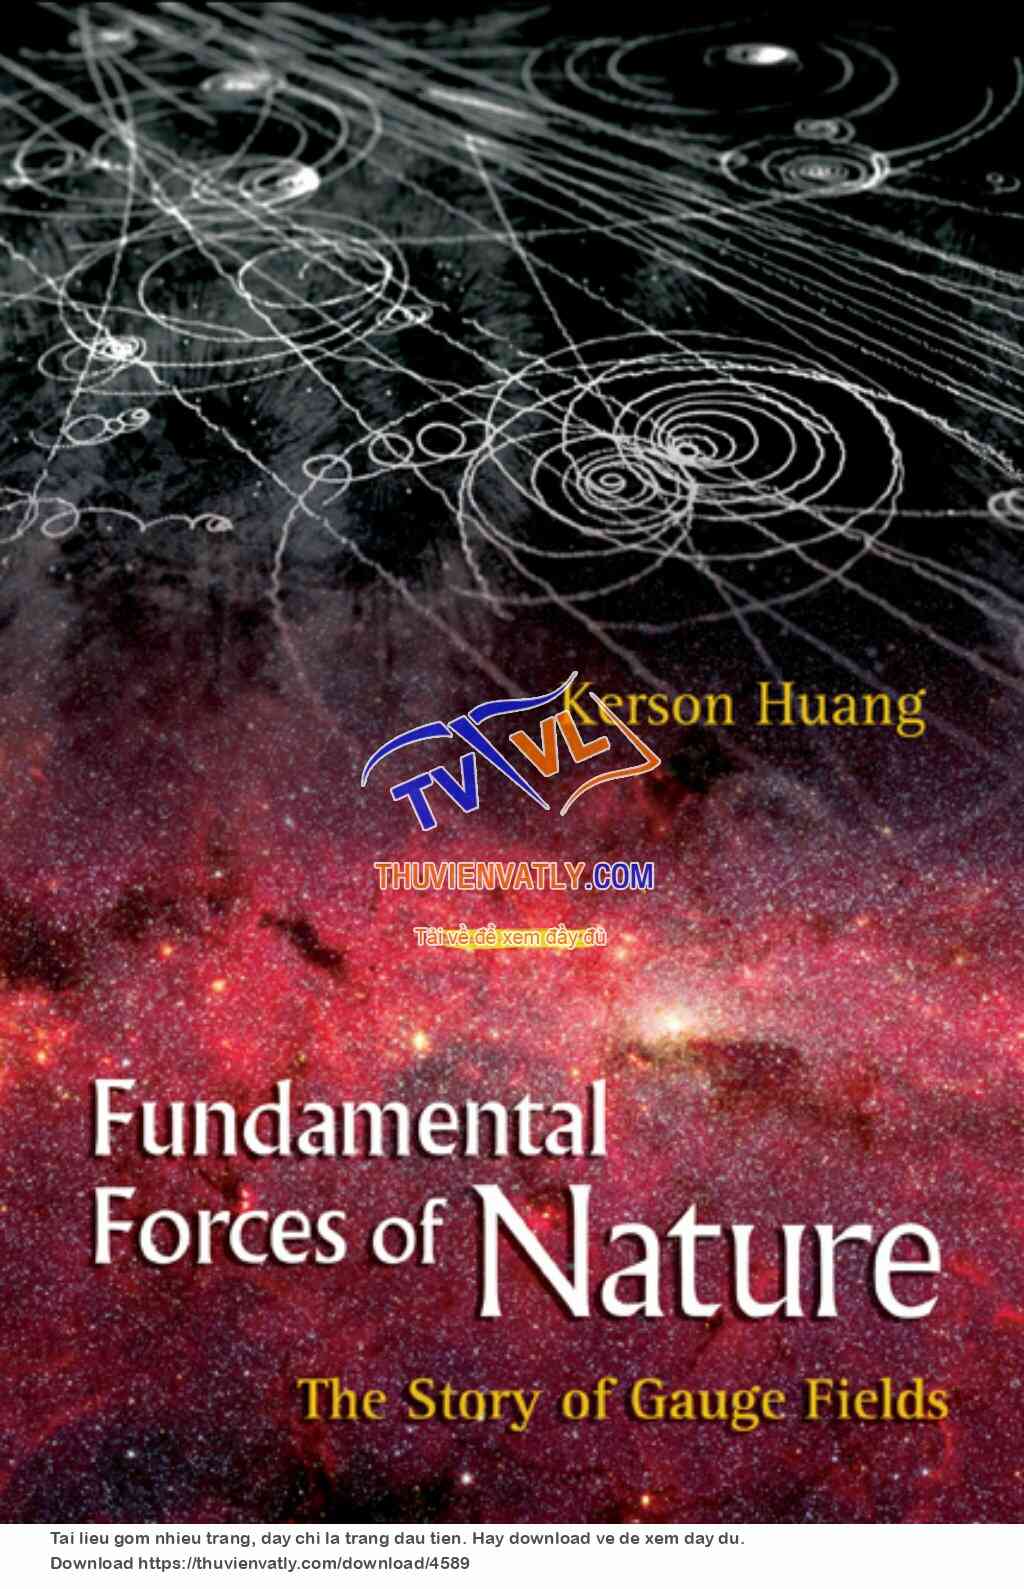 Fundamental Forces of Nature - The Story of Gauge Fields